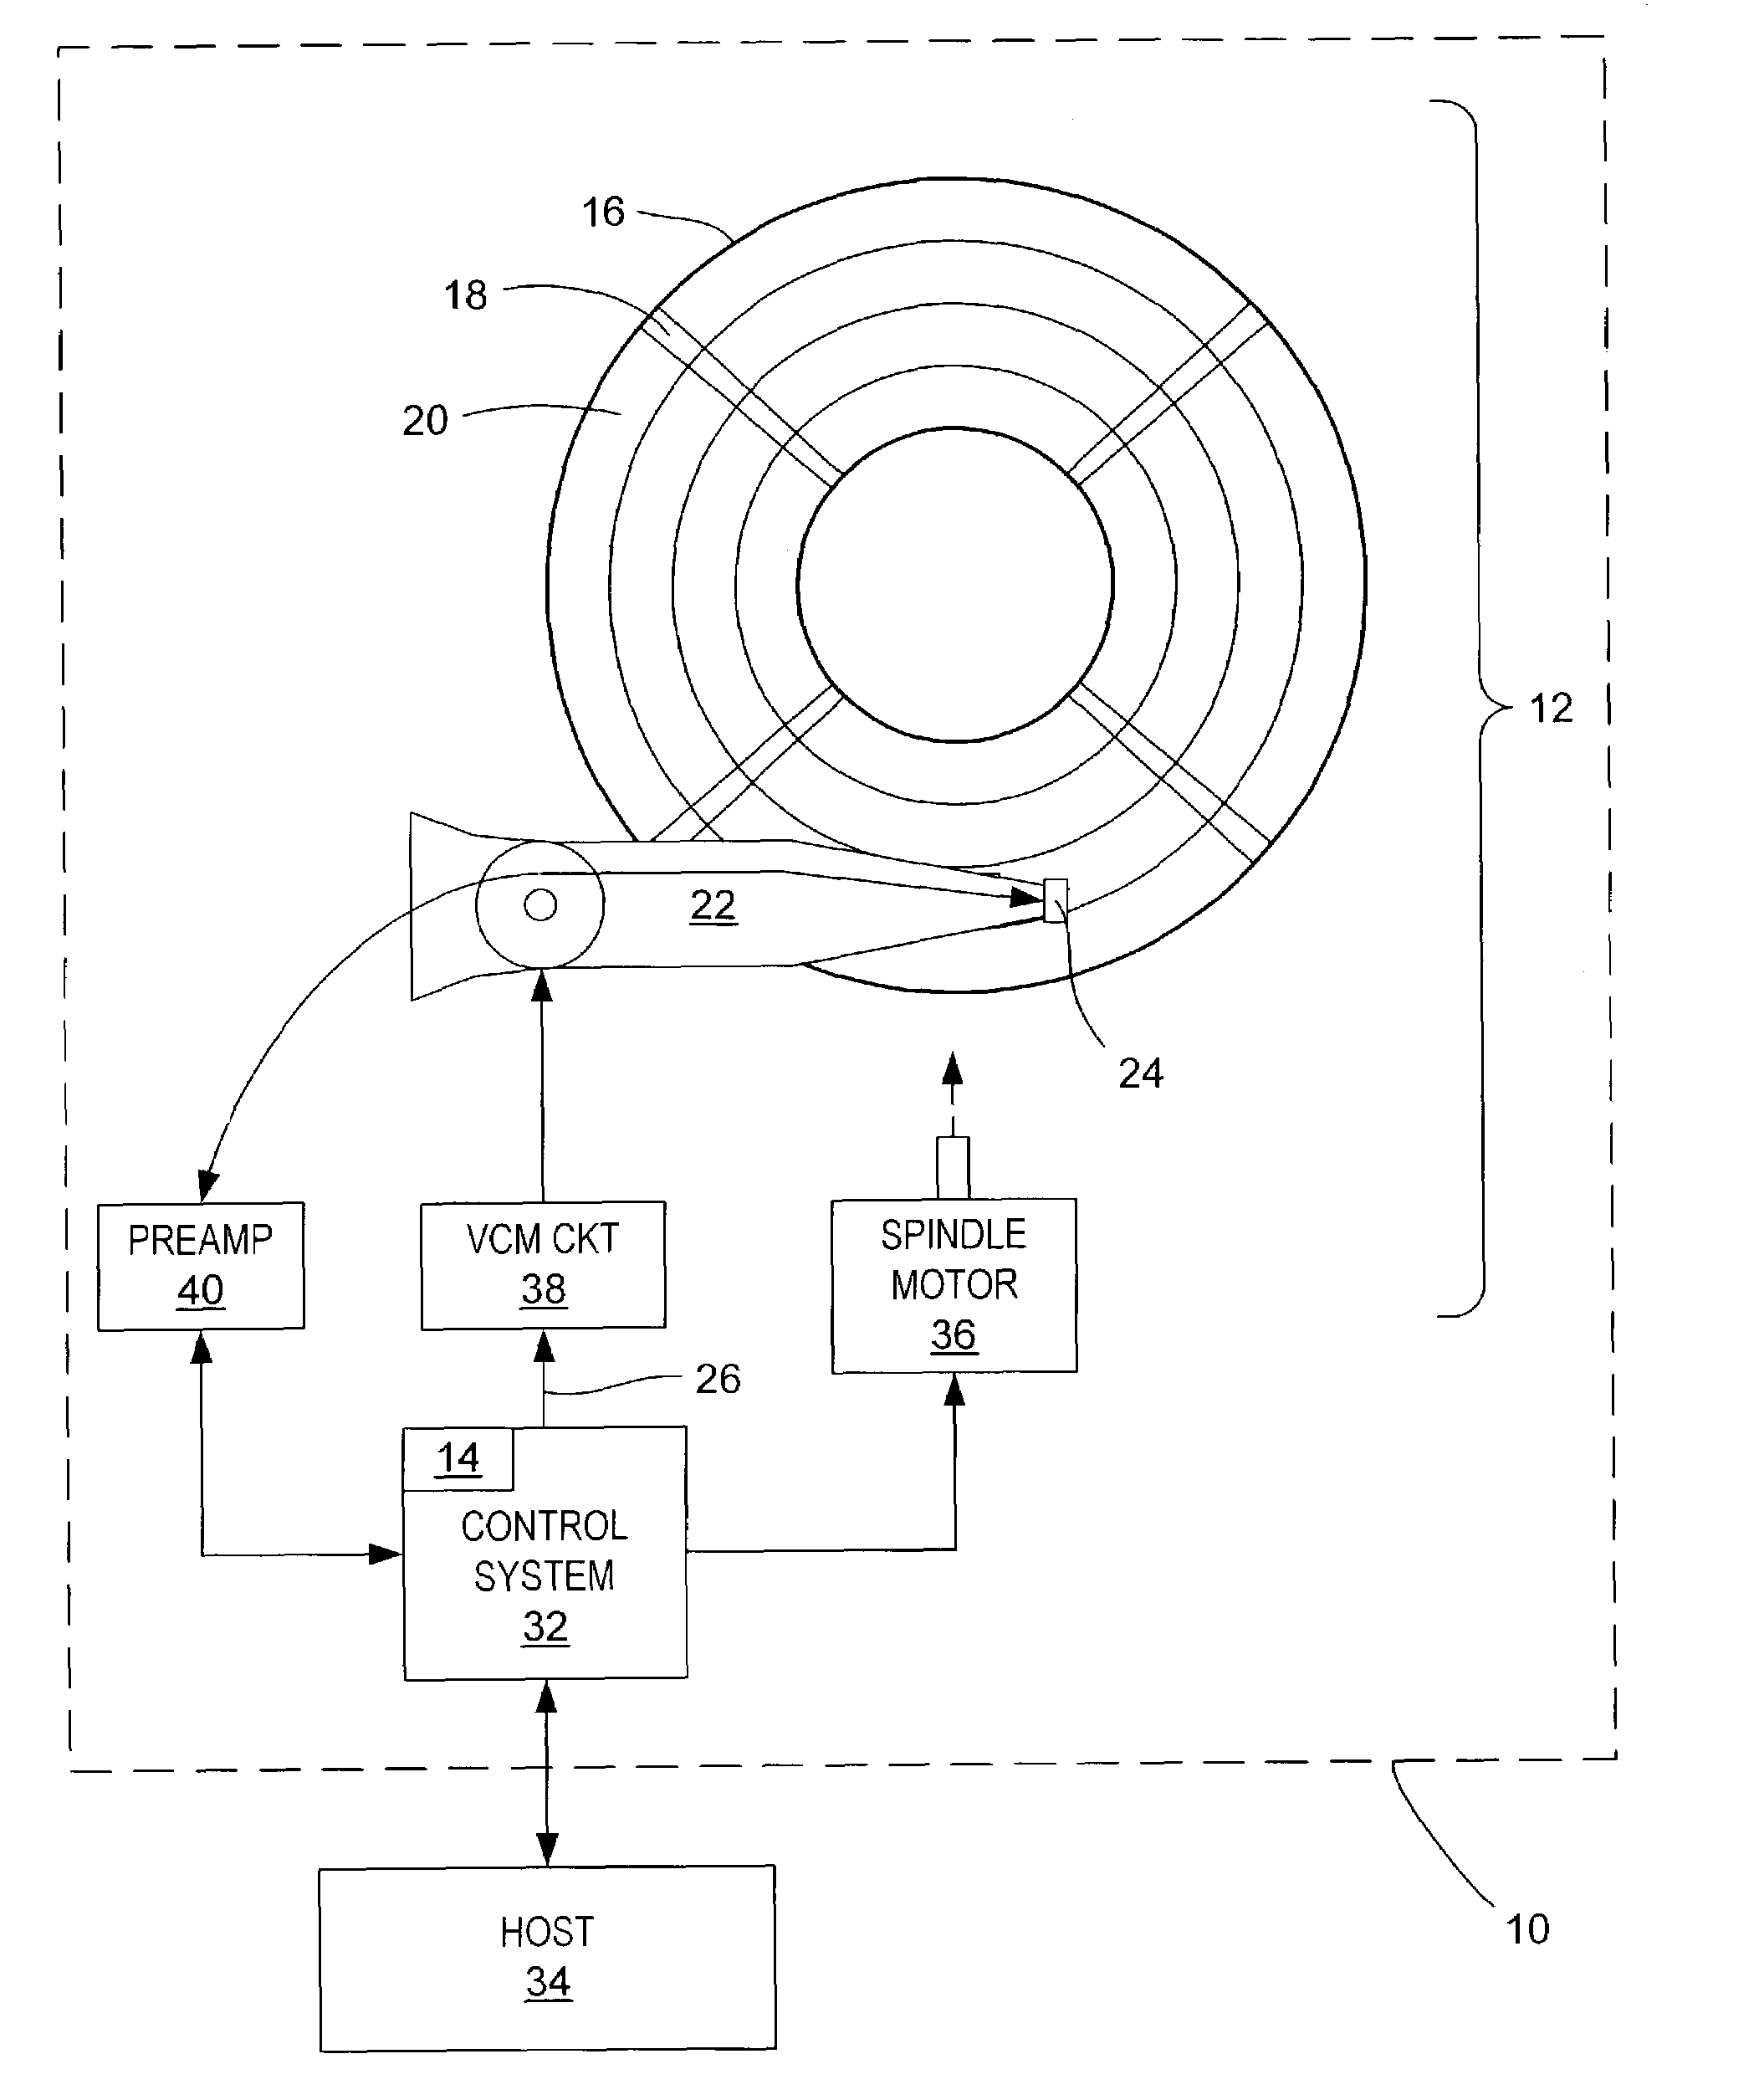 Disk drive having internal data structures for efficiently storing repeatable runout cancellation information